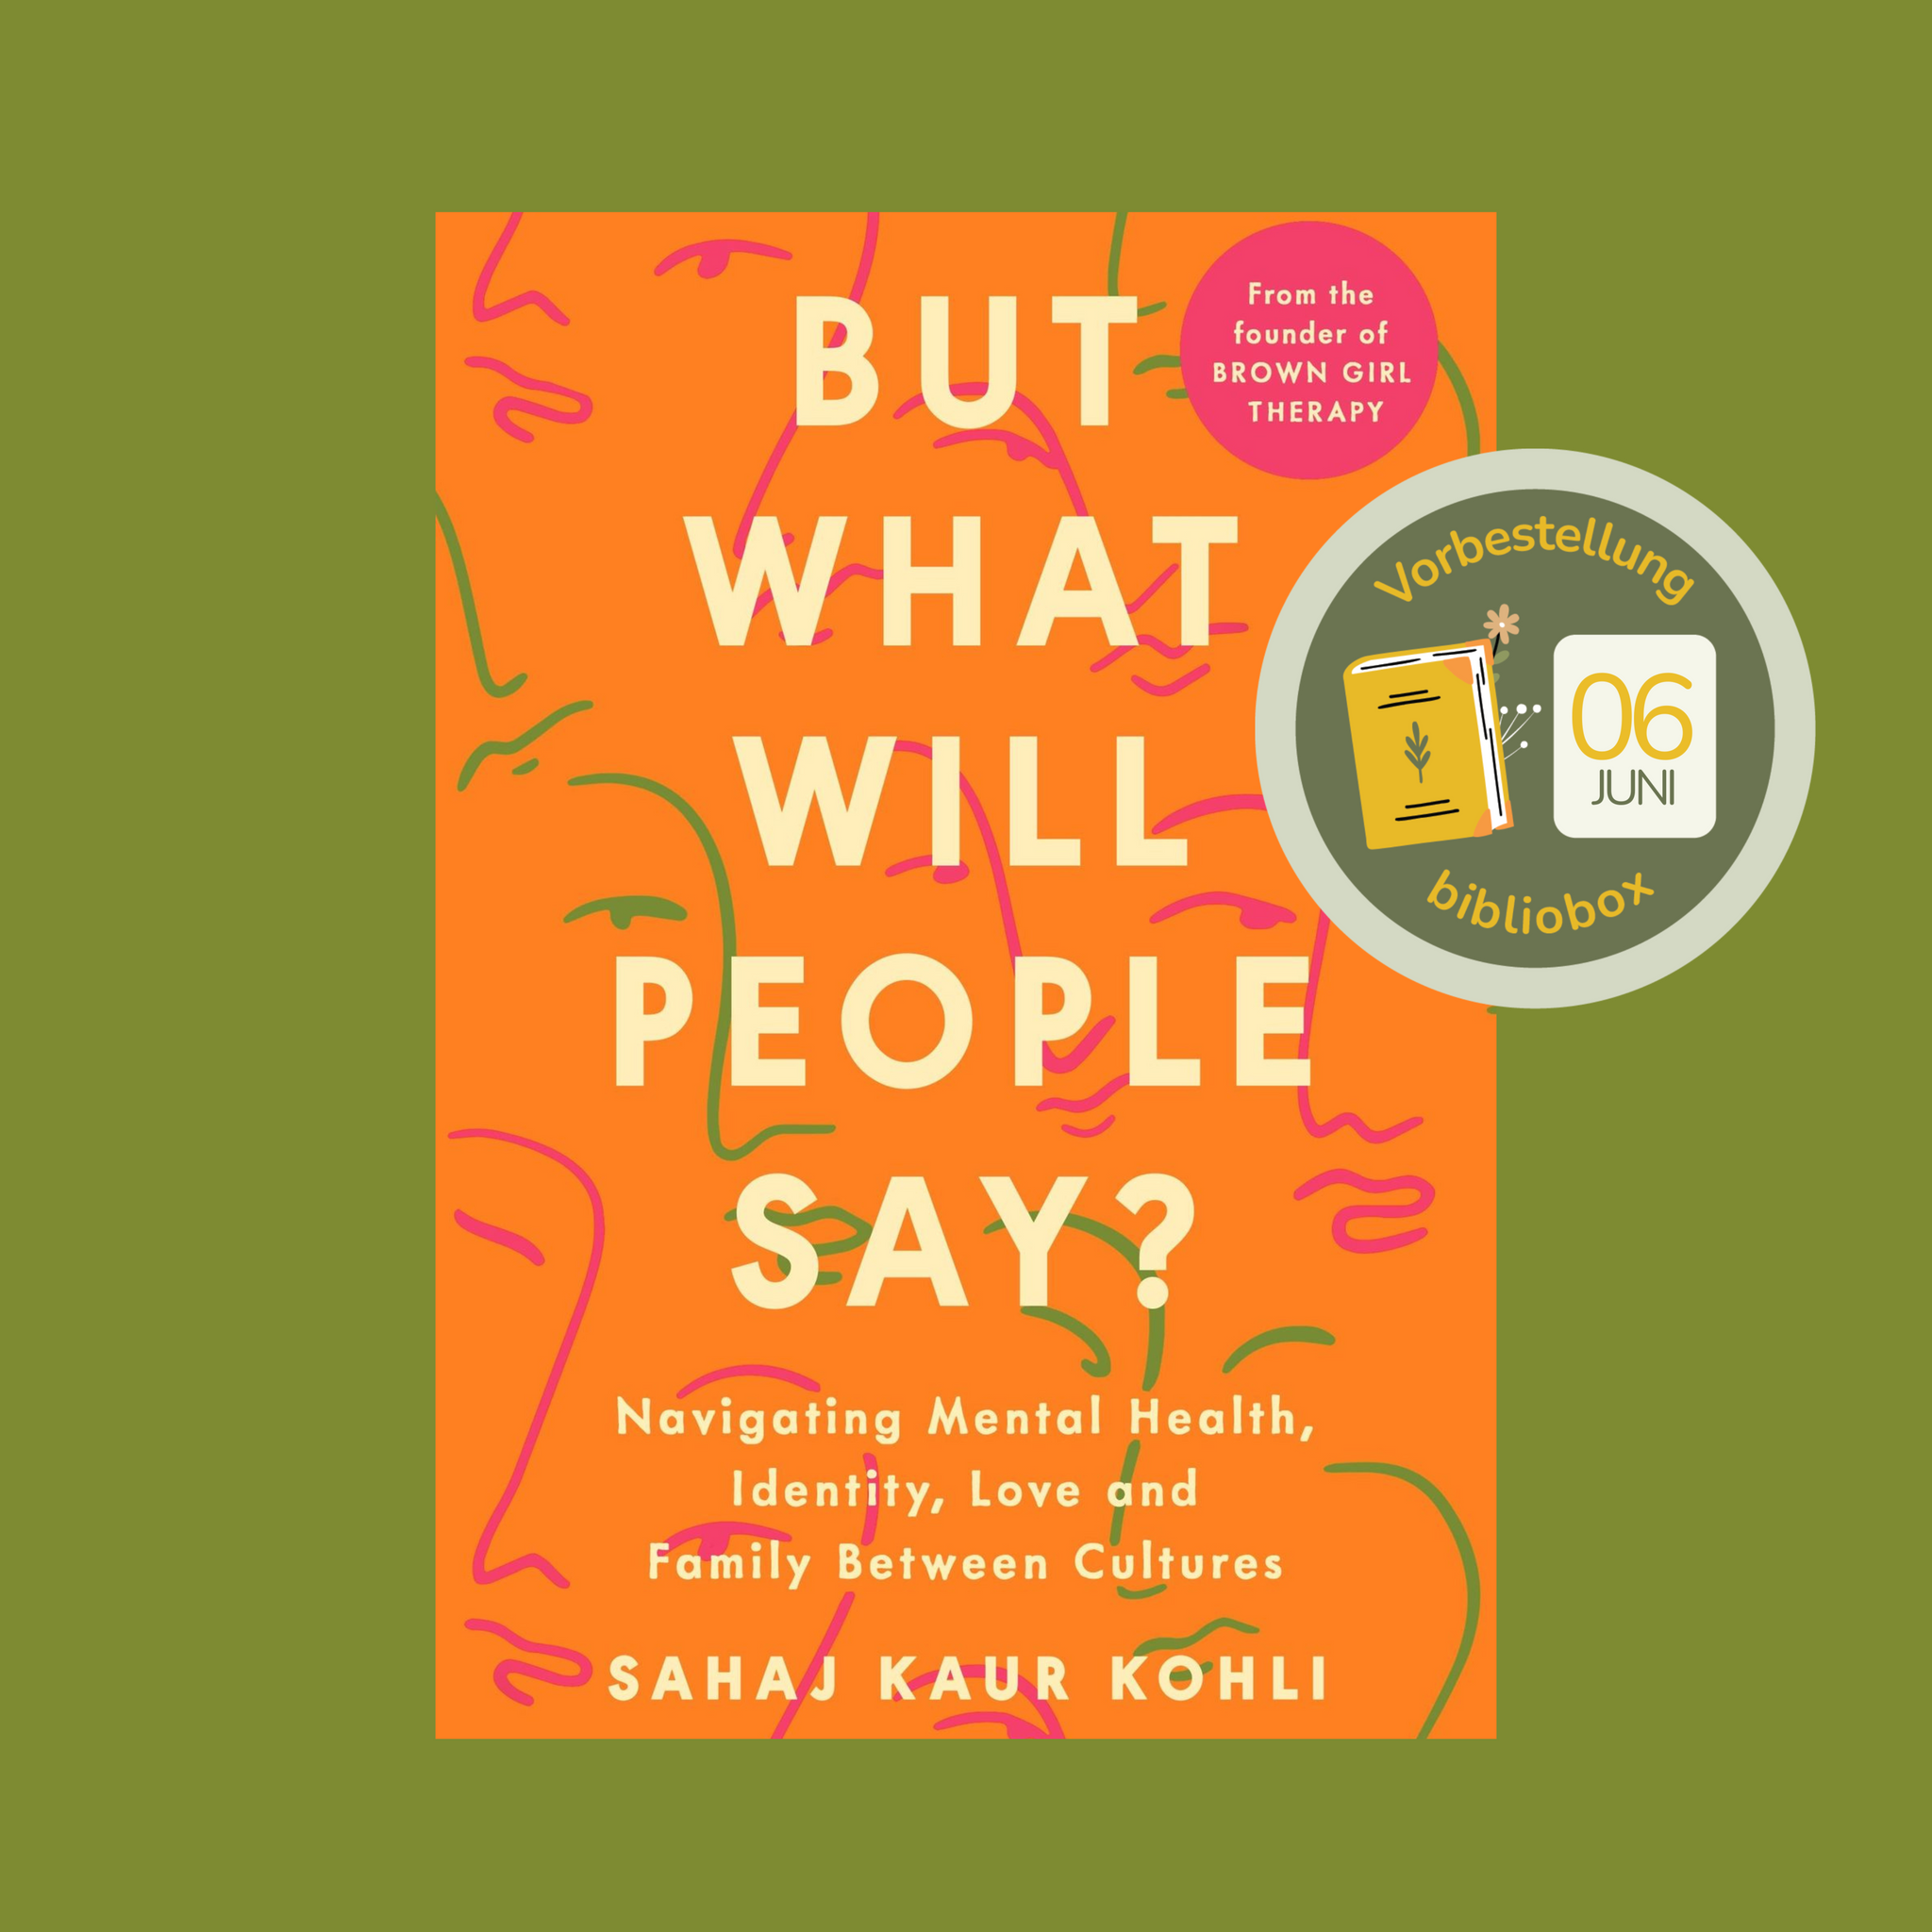 But What Will People Say? Navigating Mental Health, Identity, Love and Family Between Cultures